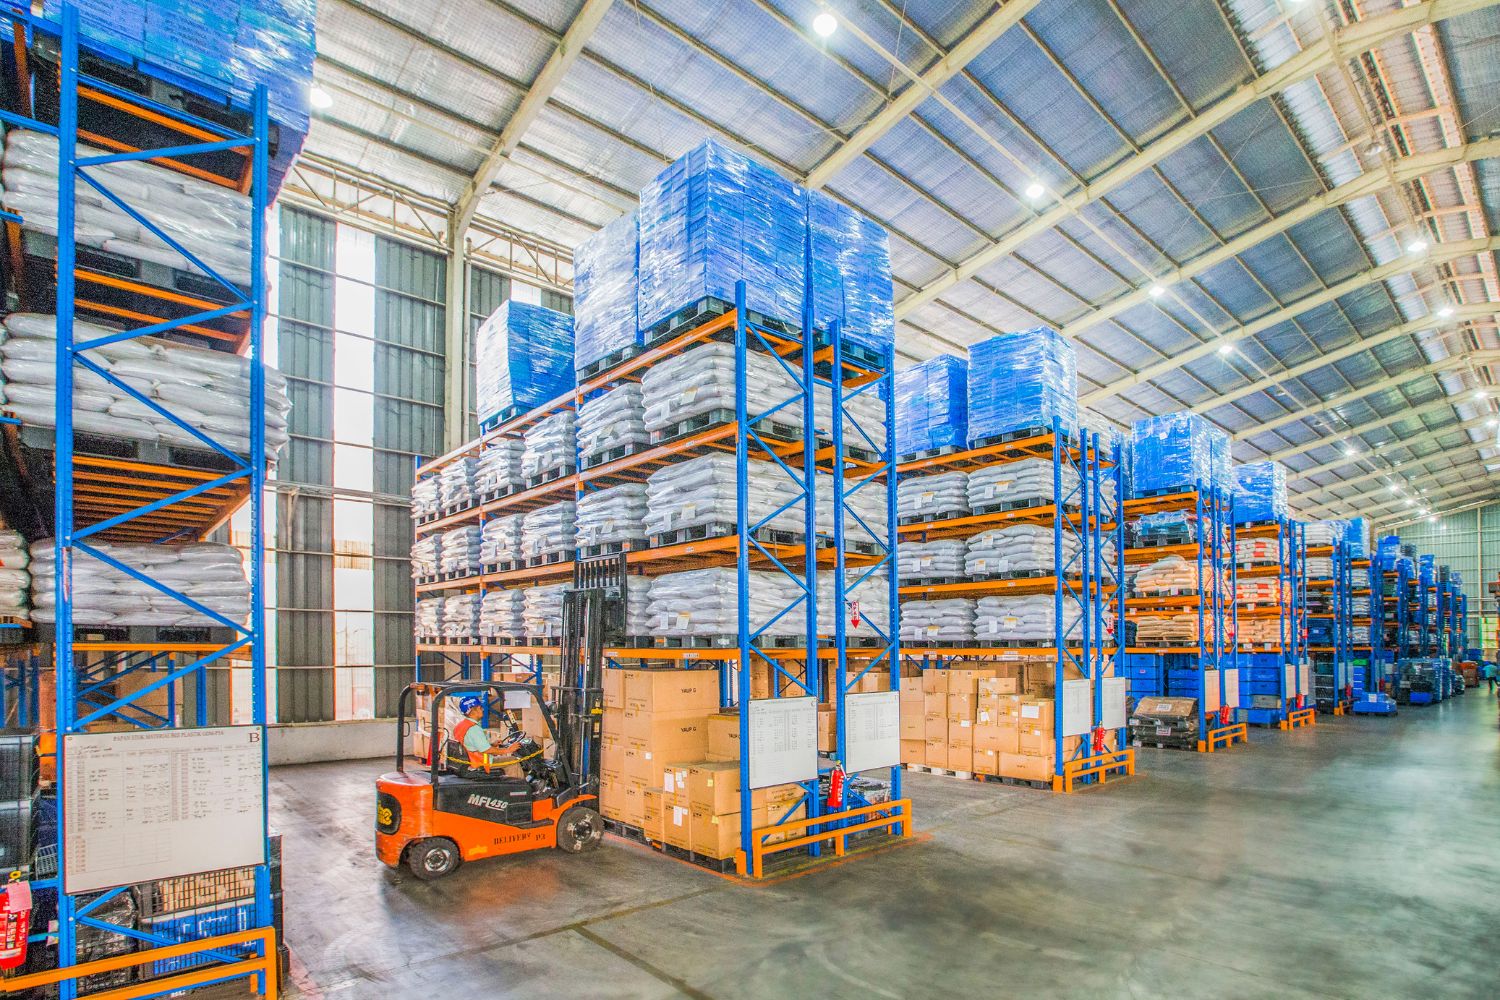 What are the ideal forklifts to use in your warehouse?